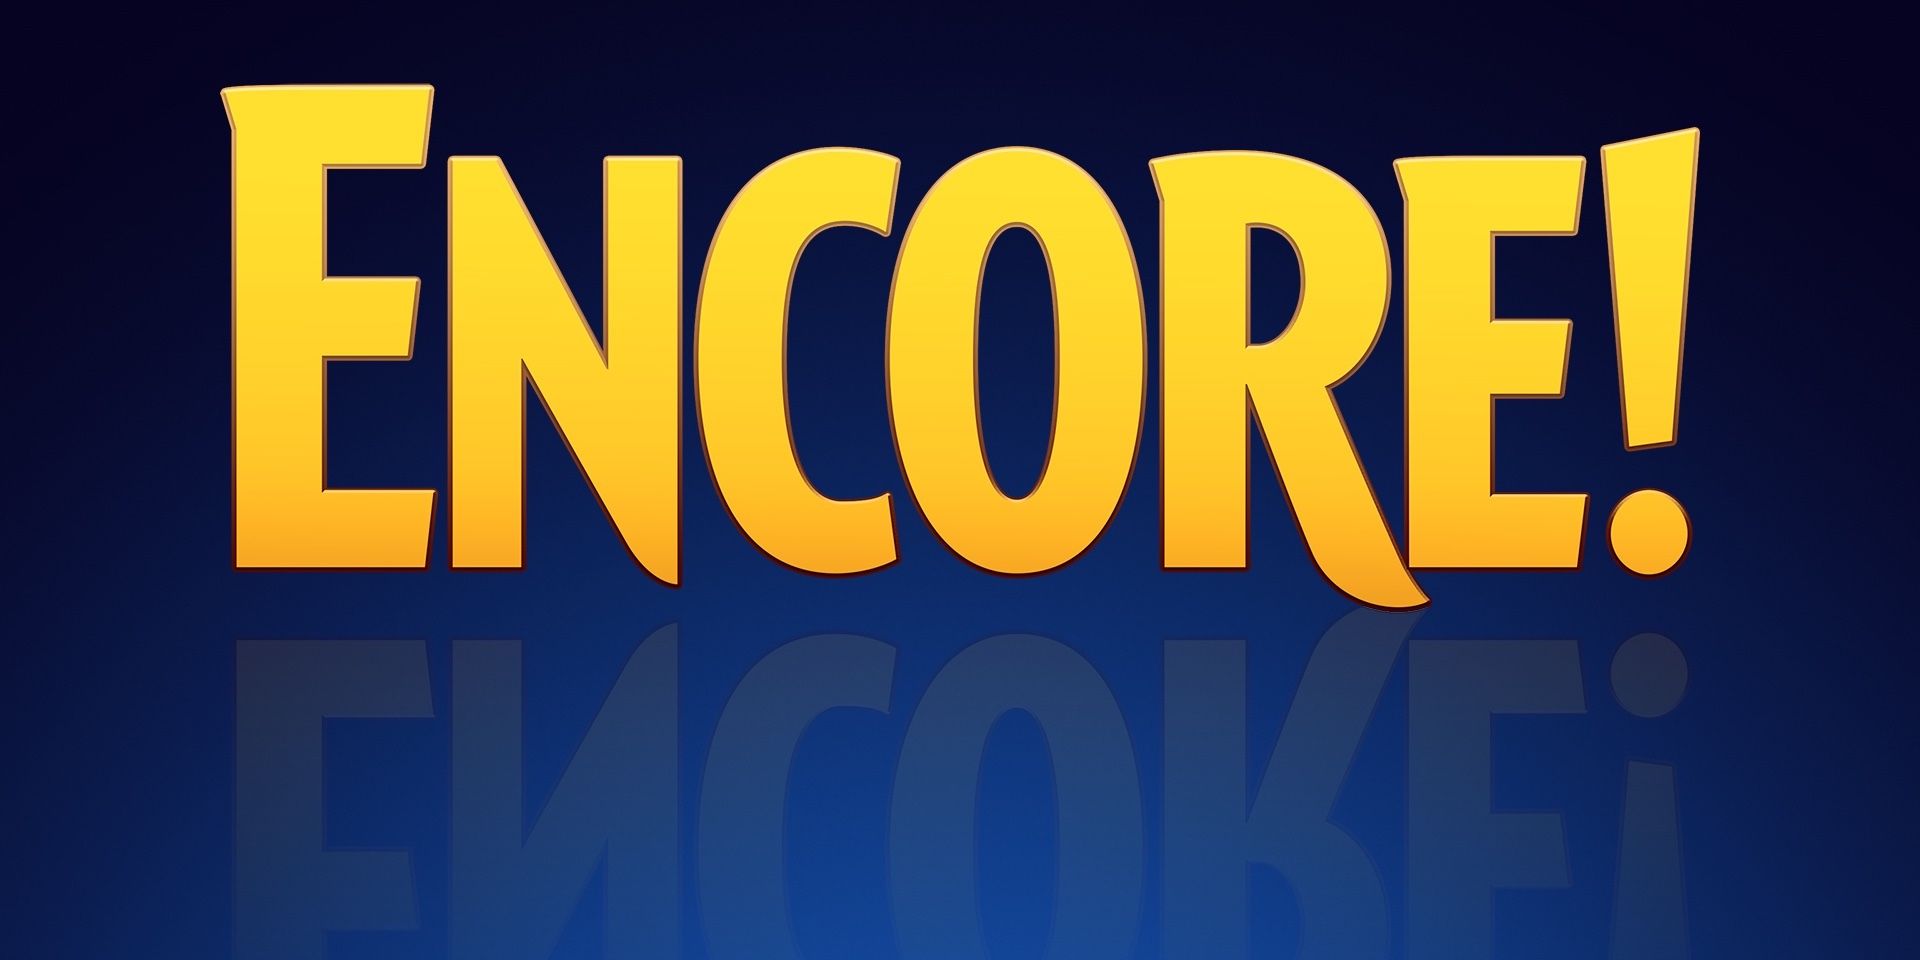 The Encore unscripted series will premiere on Disney+